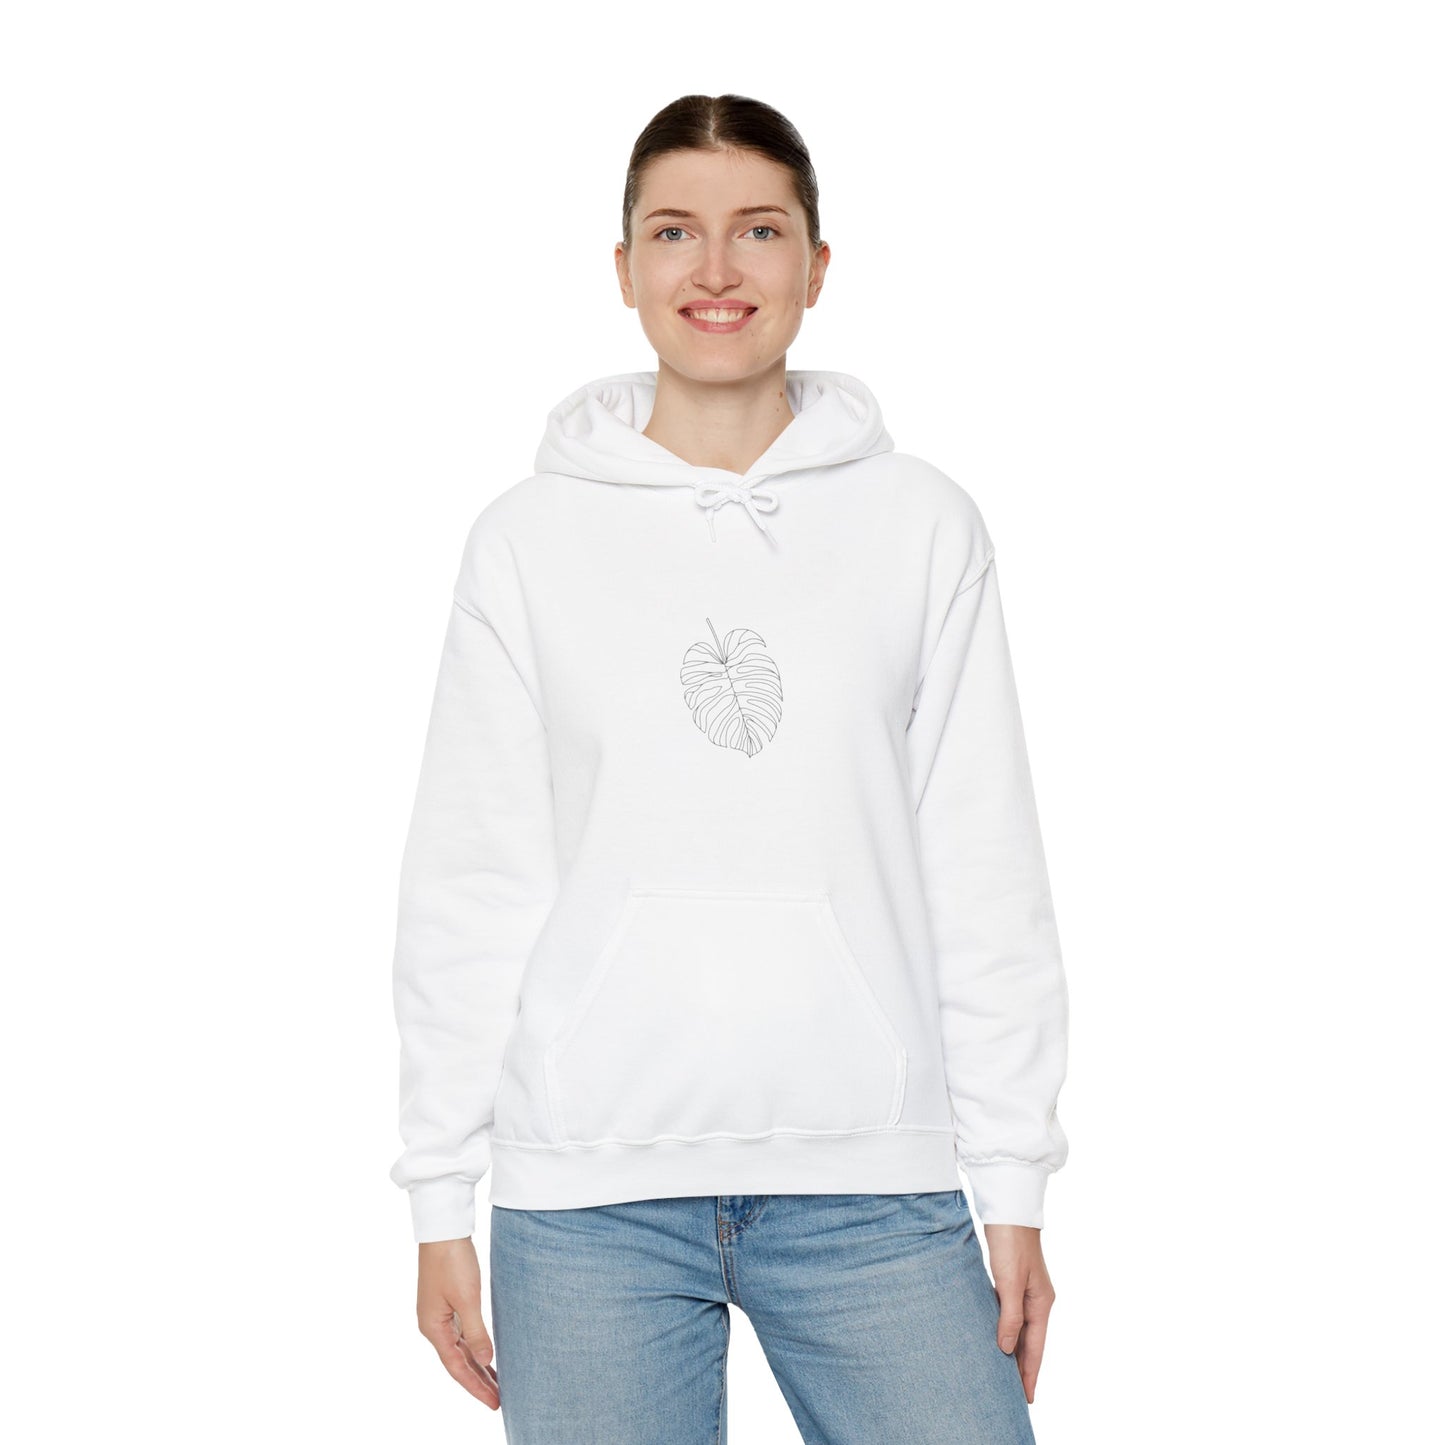 Monstera Line Drawing - "The Continuous Monstera" | unisex Hoodie